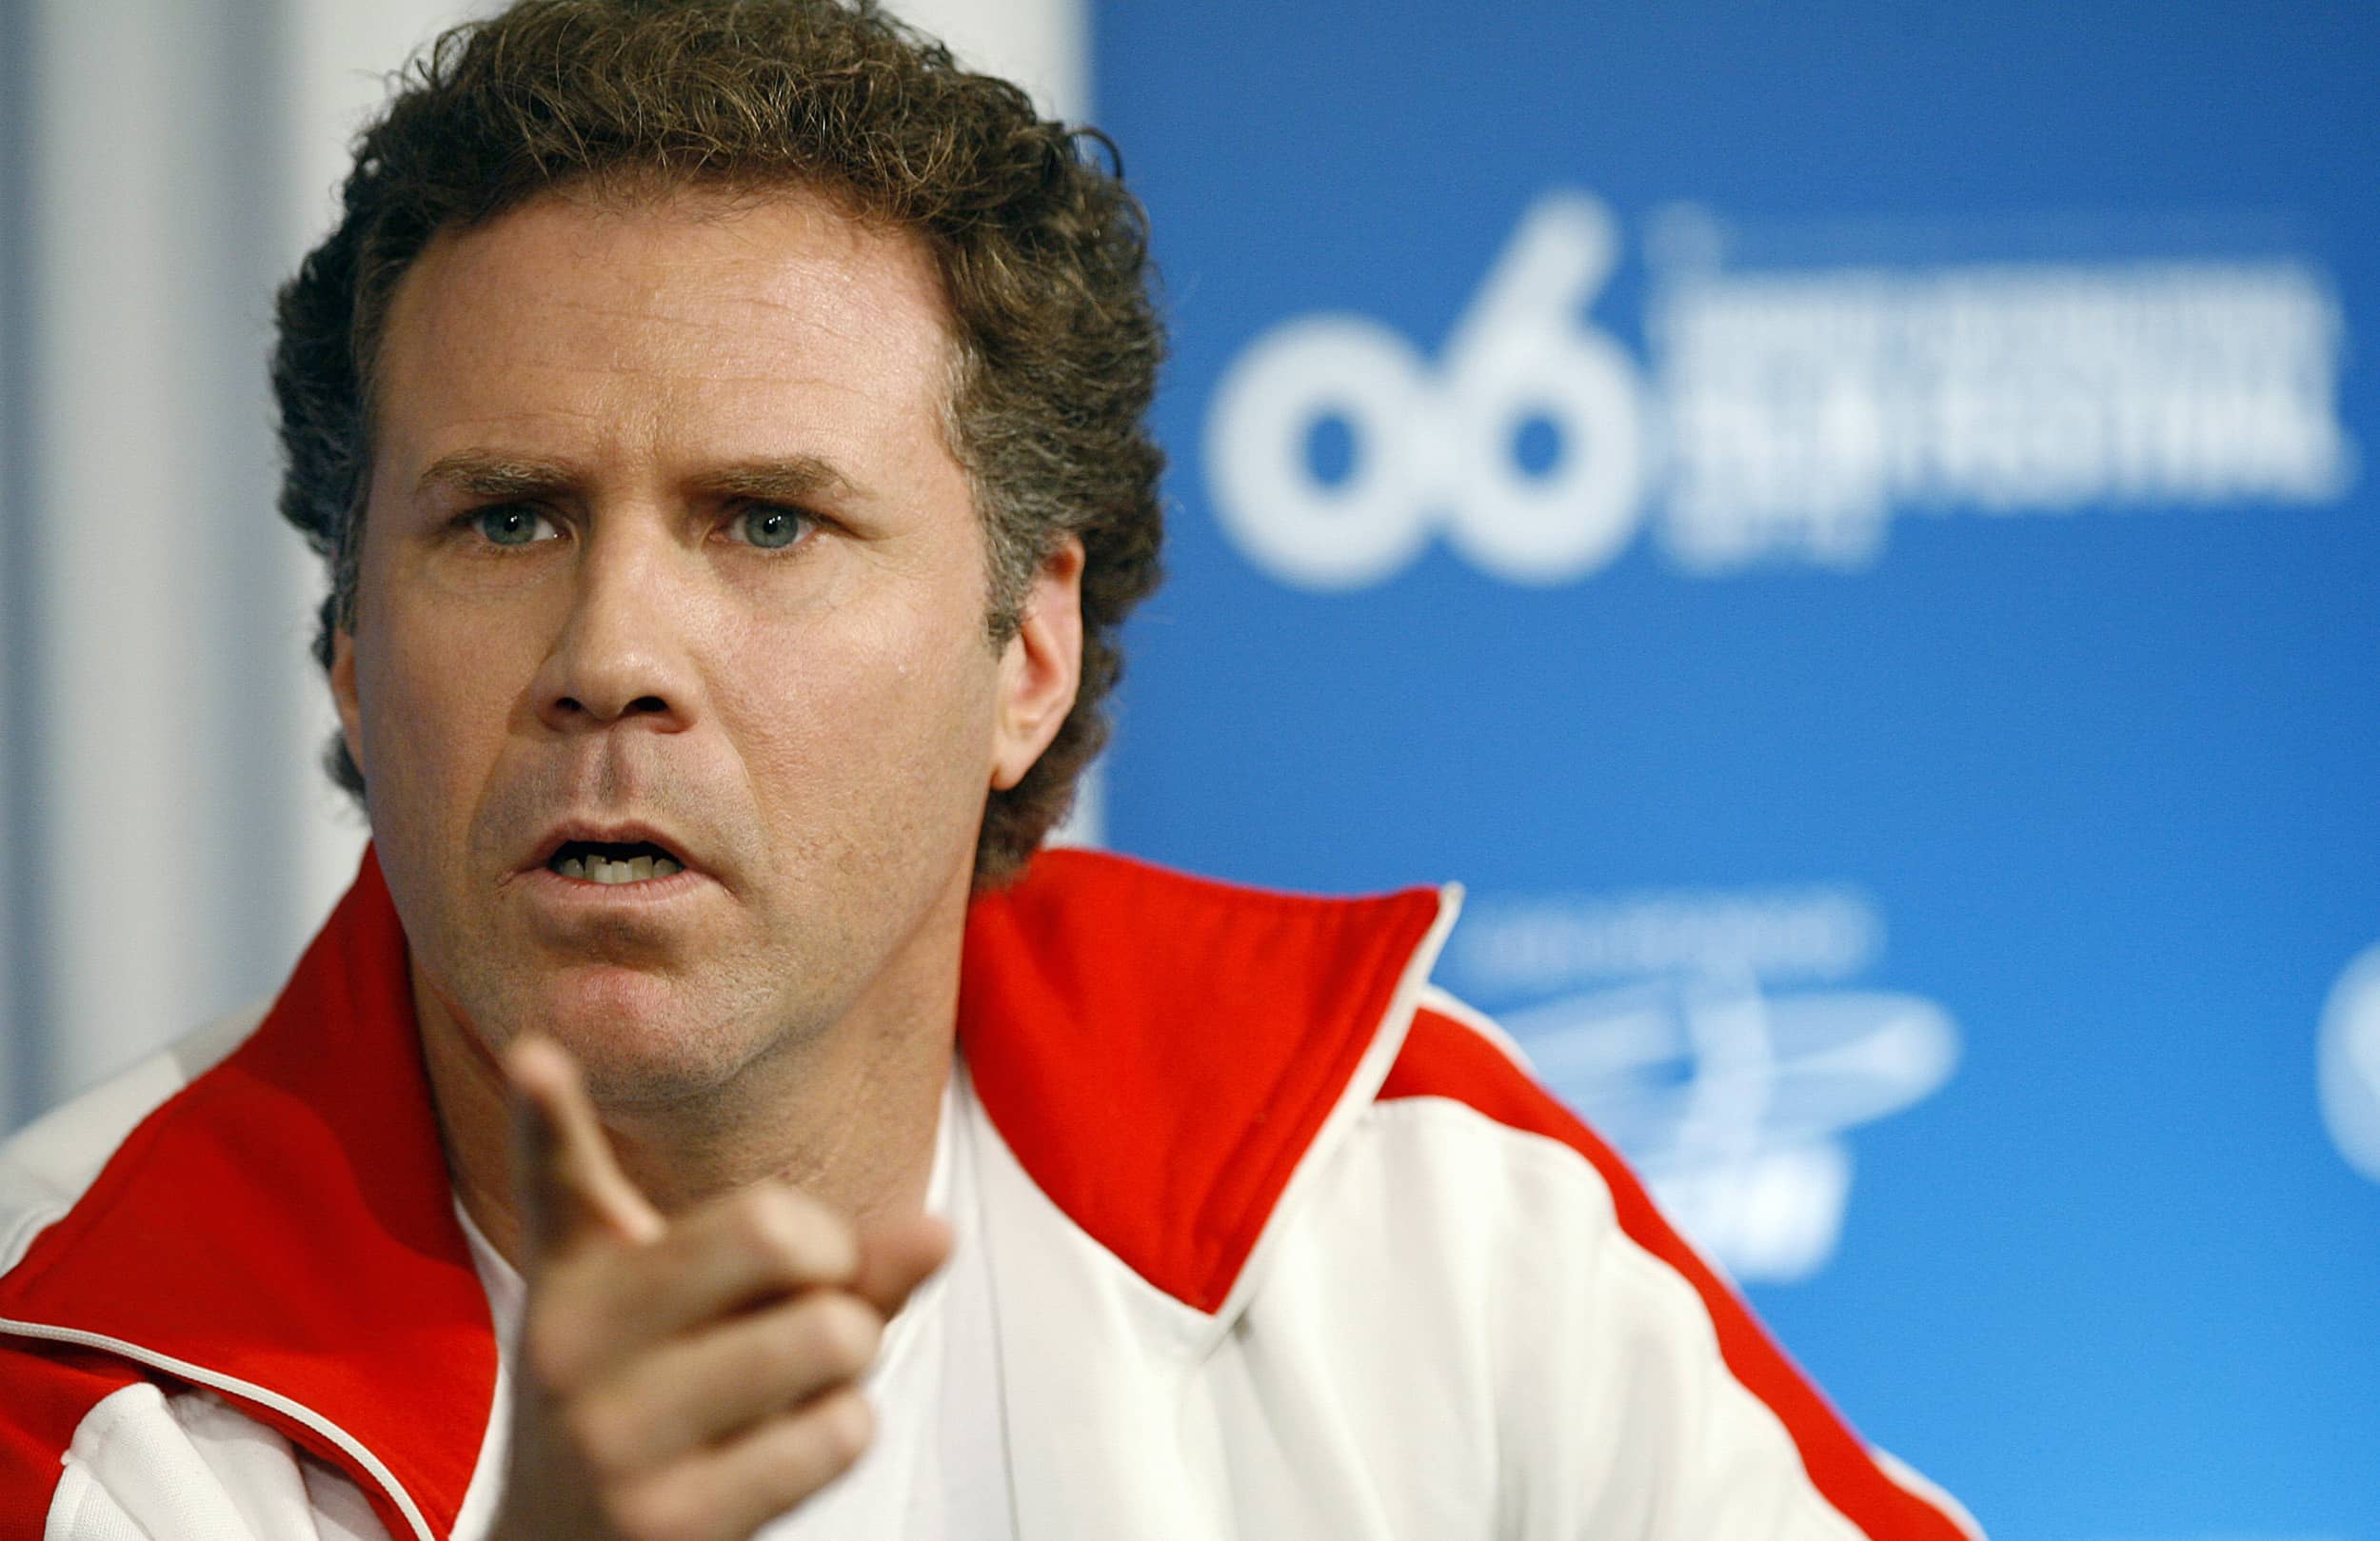 cast-member-ferrell-gestures-during-a-news-conference-at-the-31st-toronto-international-film-festival-in-toronto